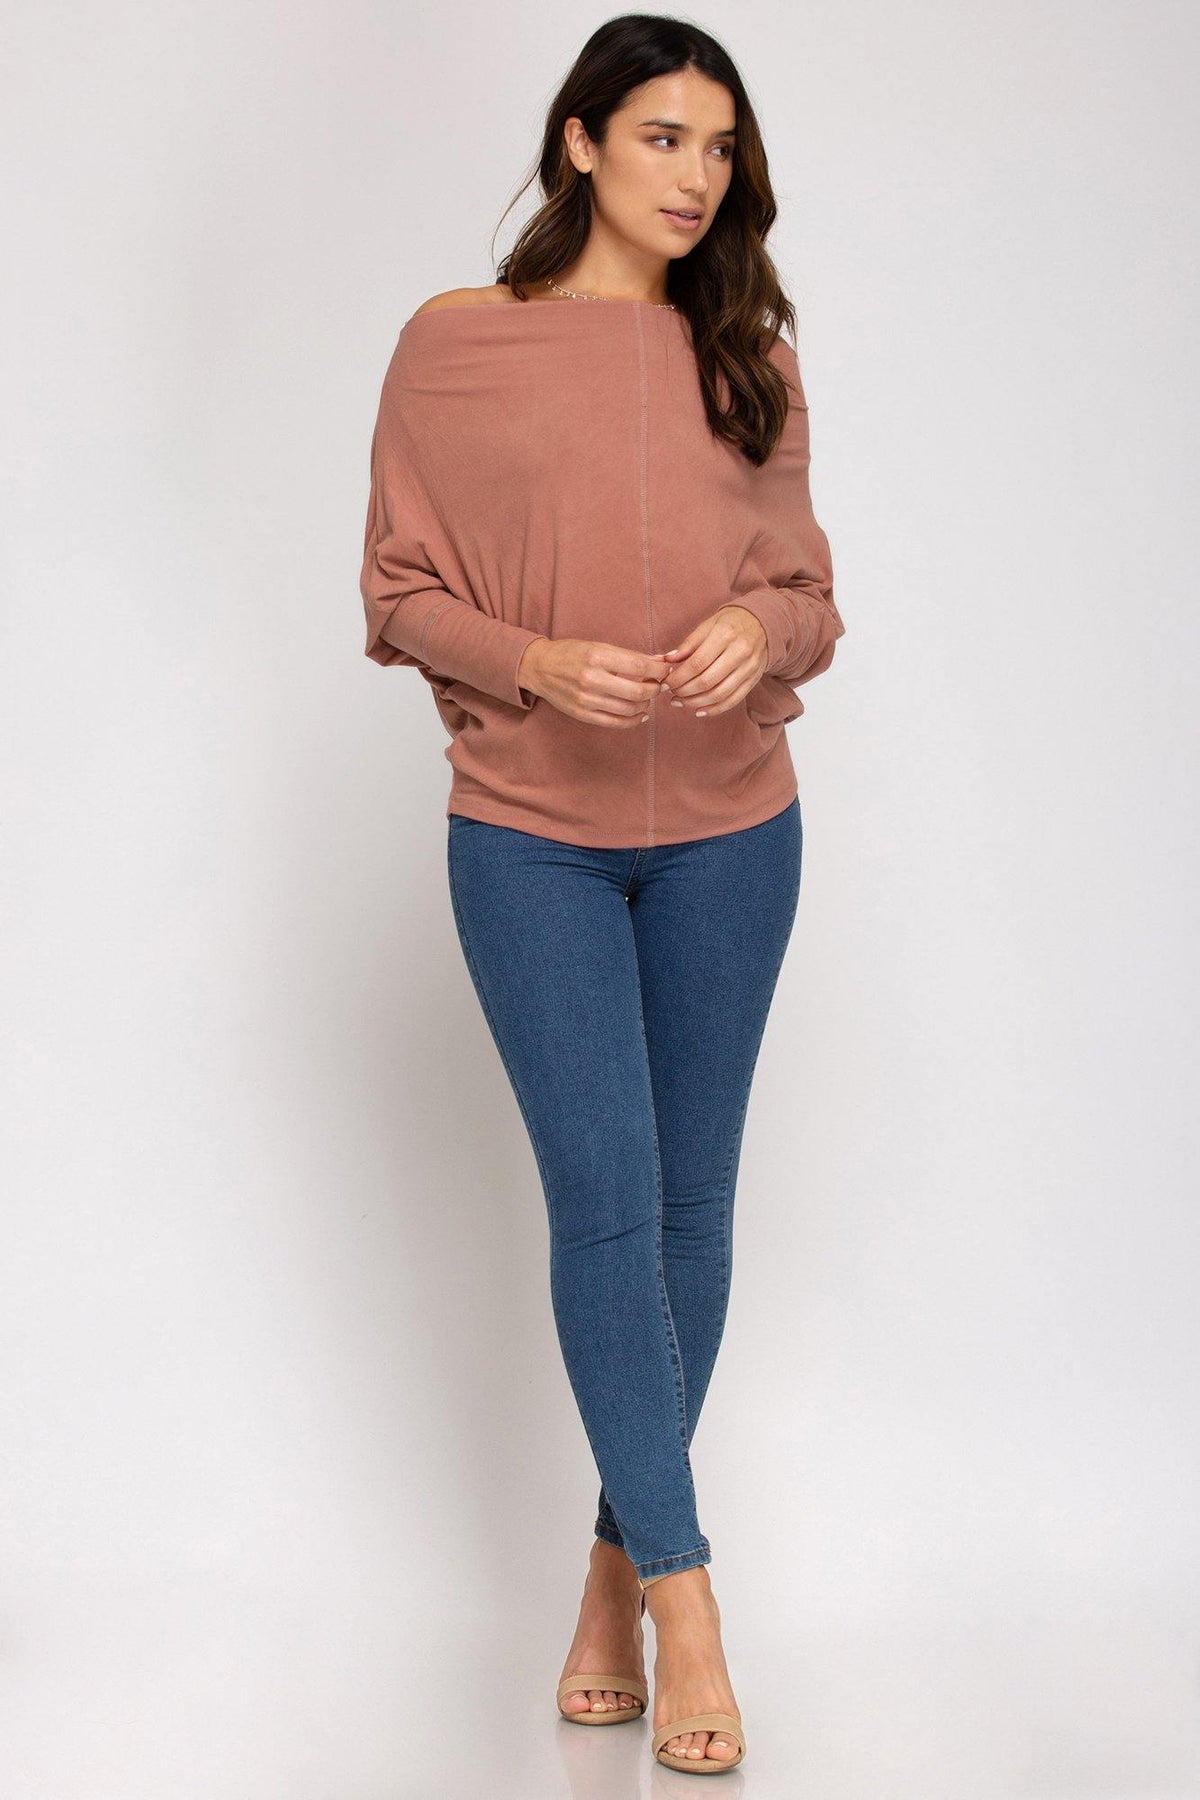 Dusty Coral Boat Neck Brushed Knit Top - Mirror Mirror Boutique